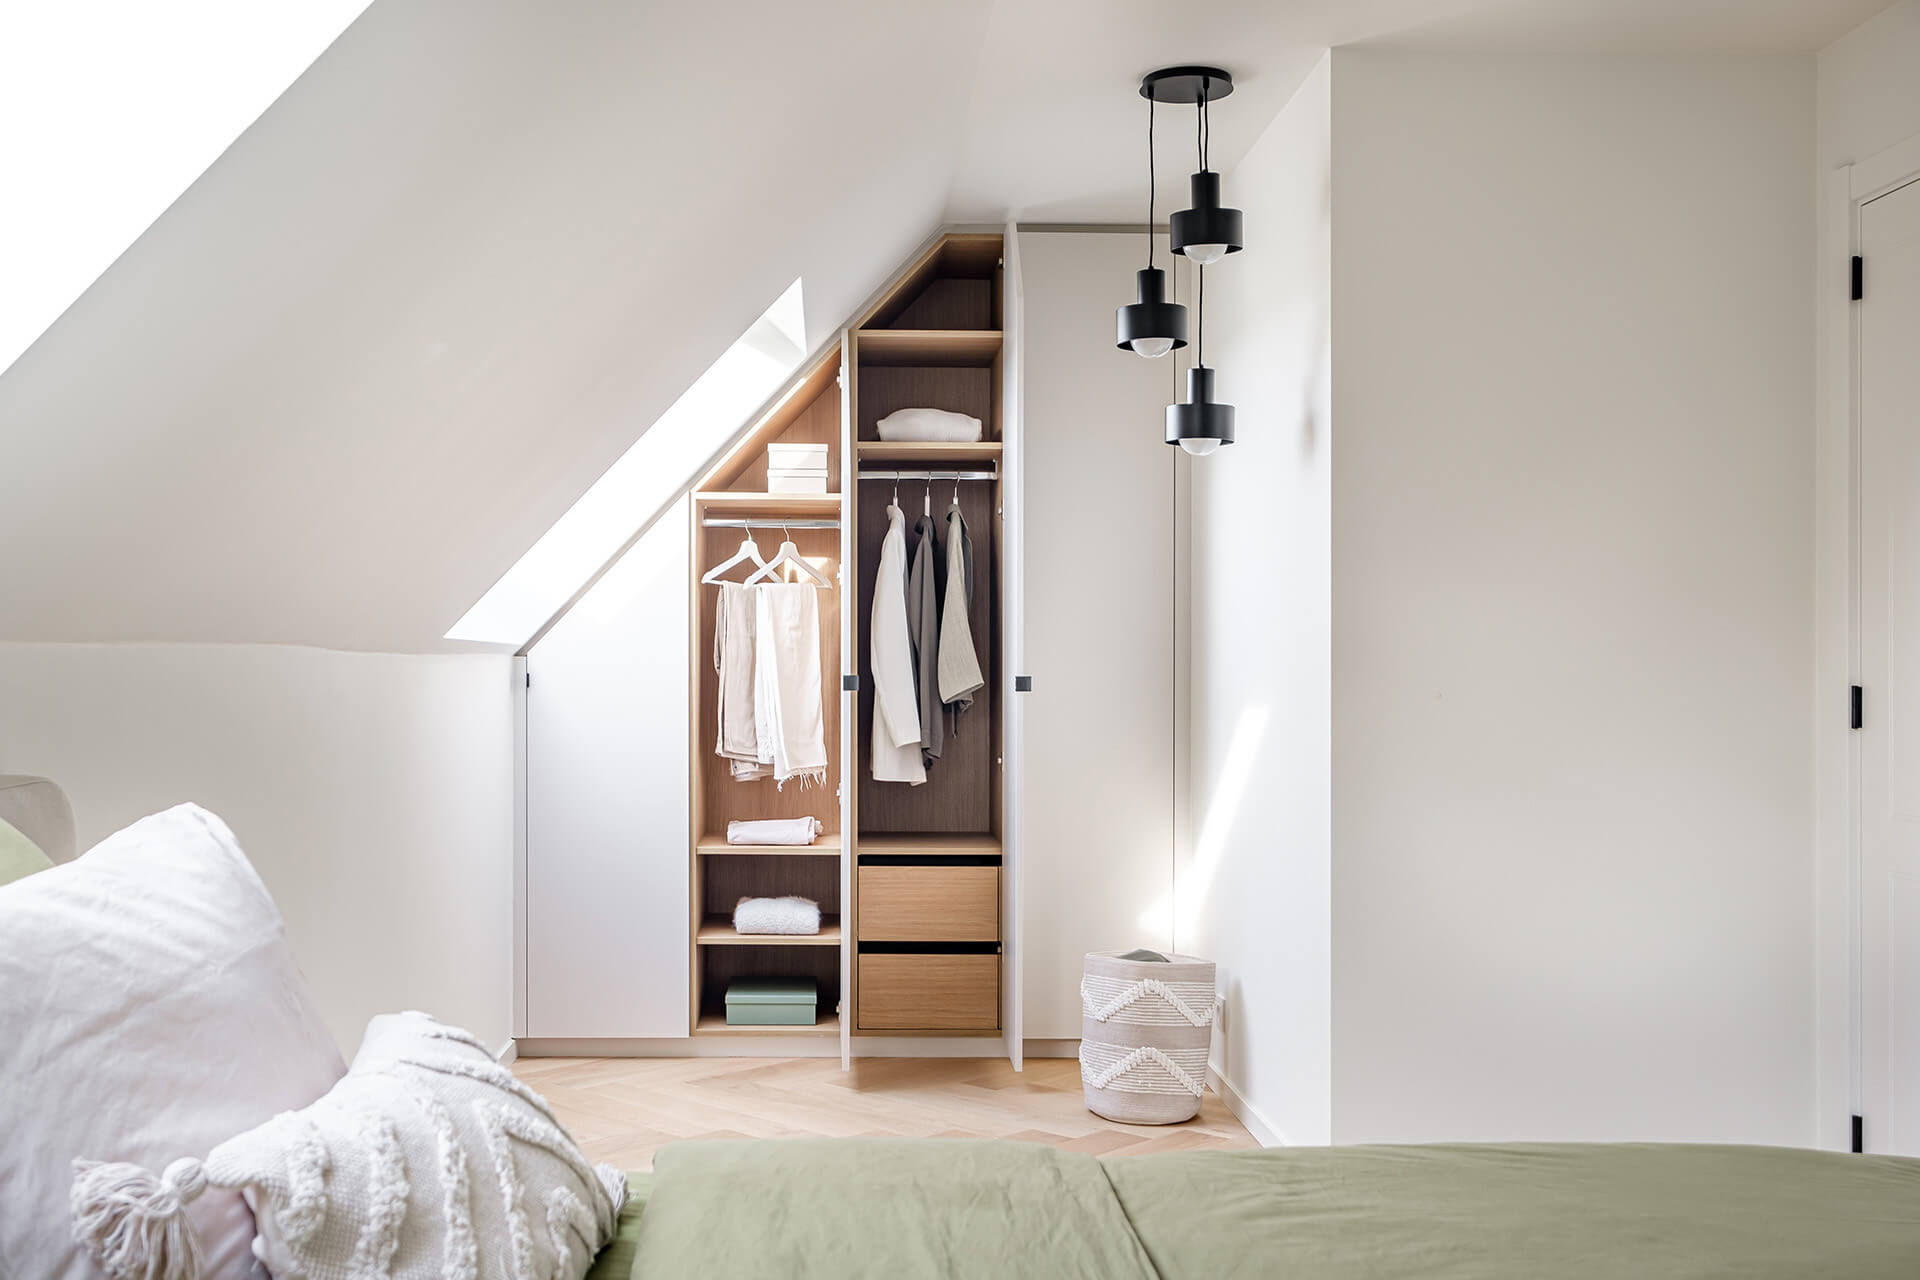 Custom wardrobe under a sloping roof with a white exterior and wooden interior